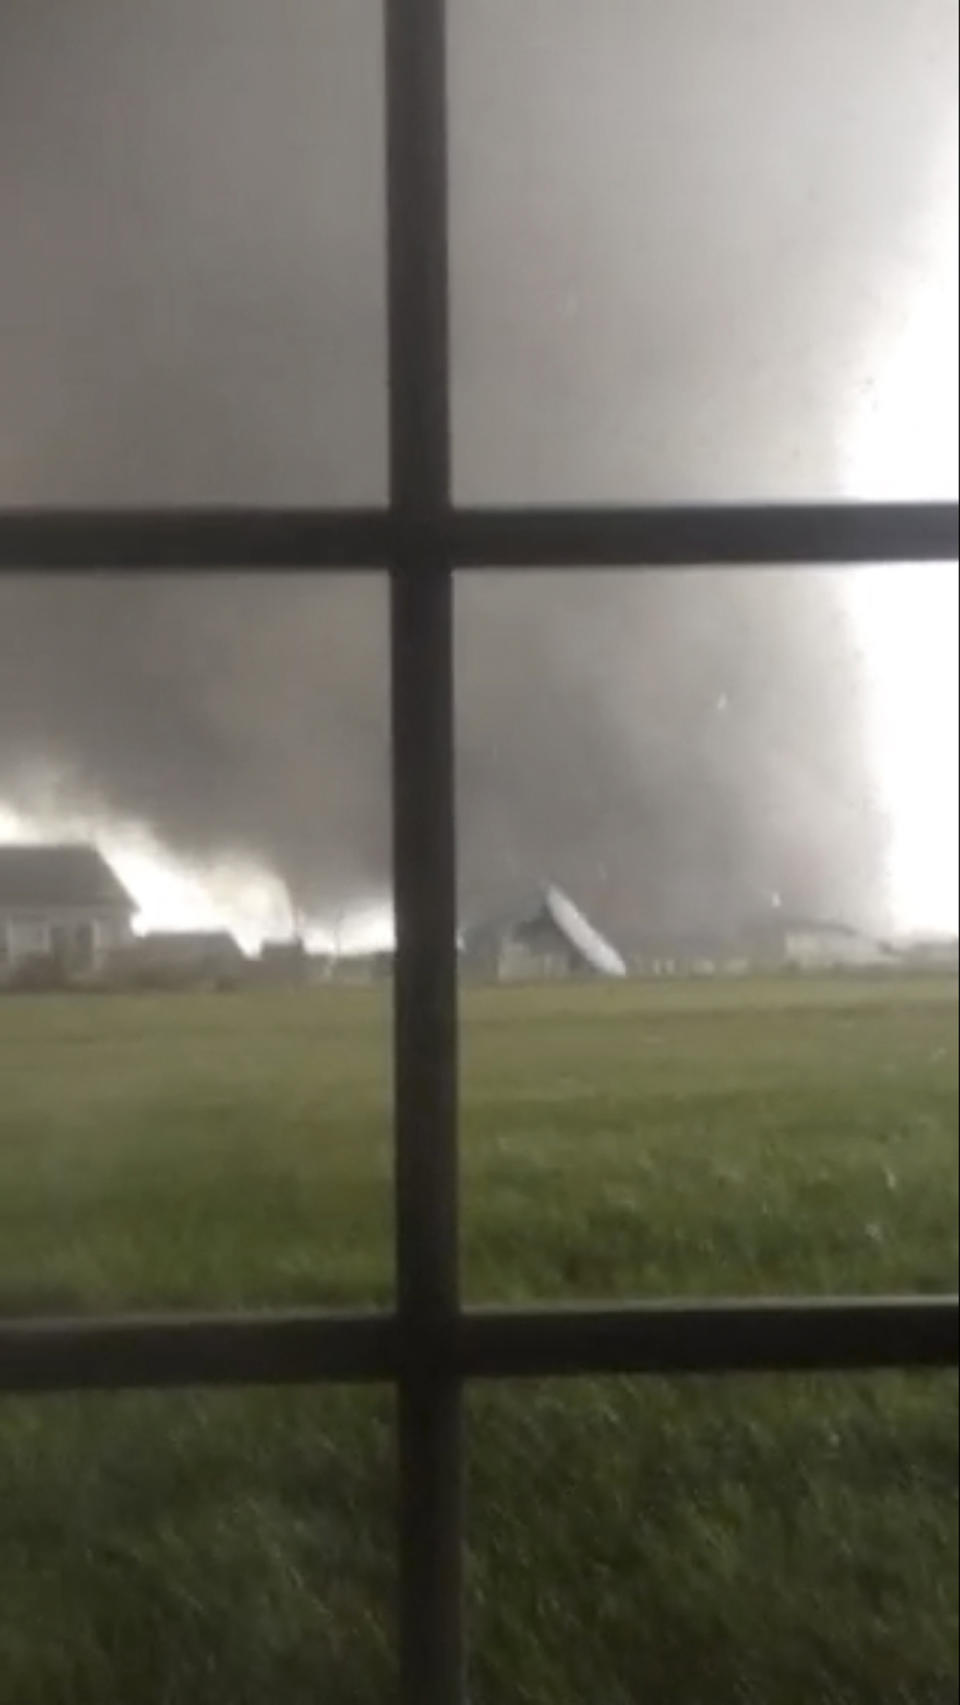 An active tornado is seen through a window as it touches down in Washington, Illinois on November 17, 2013, in this still image captured from a video courtesy of Anthony Khoury. A fast-moving storm system spawned multiple tornadoes in Illinois and Indiana, threatening some 53 million people across 10 Midwestern states on Sunday, U.S. weather officials said. Washington, Illinois is located 145 miles (233 km) southwest of Chicago. REUTERS/Anthony Khoury/Handout via Reuters (UNITED STATES - Tags: DISASTER ENVIRONMENT) ATTENTION EDITORS - THIS IMAGE HAS BEEN SUPPLIED BY A THIRD PARTY. IT IS DISTRIBUTED, EXACTLY AS RECEIVED BY REUTERS, AS A SERVICE TO CLIENTS. NO SALES. NO ARCHIVES. FOR EDITORIAL USE ONLY. NOT FOR SALE FOR MARKETING OR ADVERTISING CAMPAIGNS. MANDATORY CREDIT